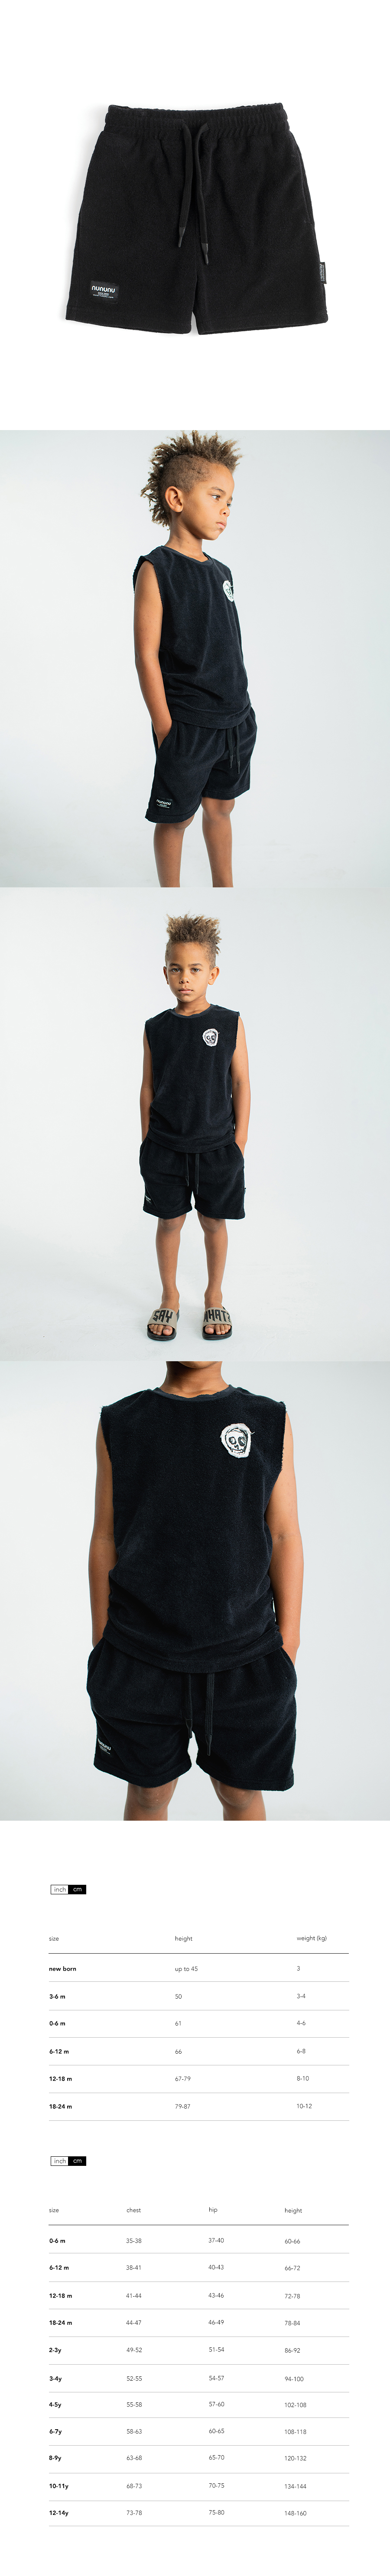 TERRY CLOTH SHORTS Details